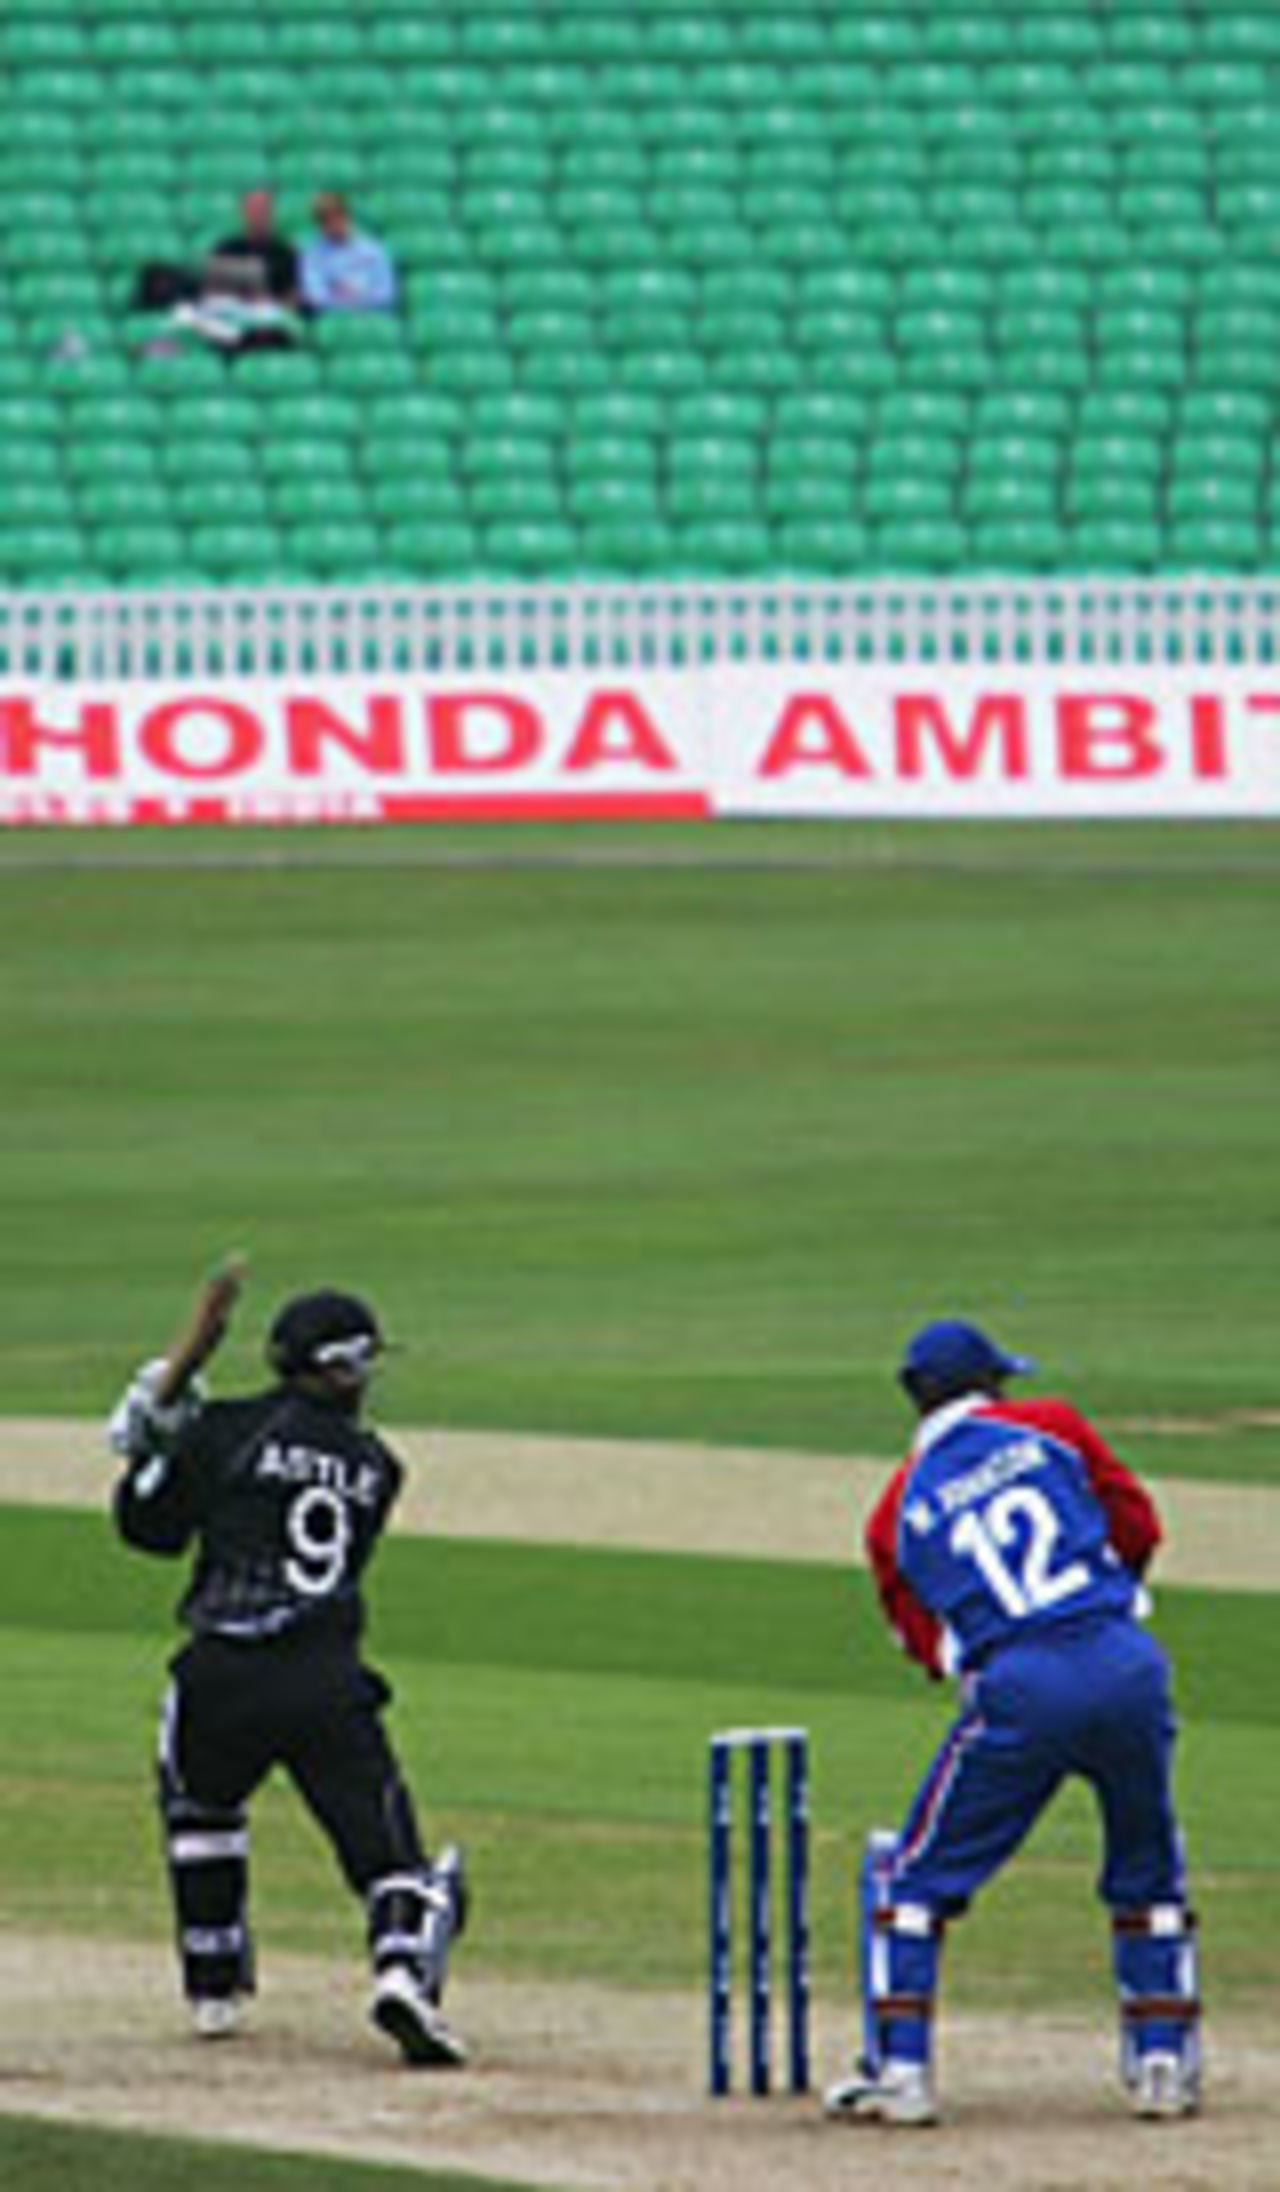 Nathan Astle drives against a backdrop of empty seats, New Zealand v USA, Champions Trophy, September 10 2004